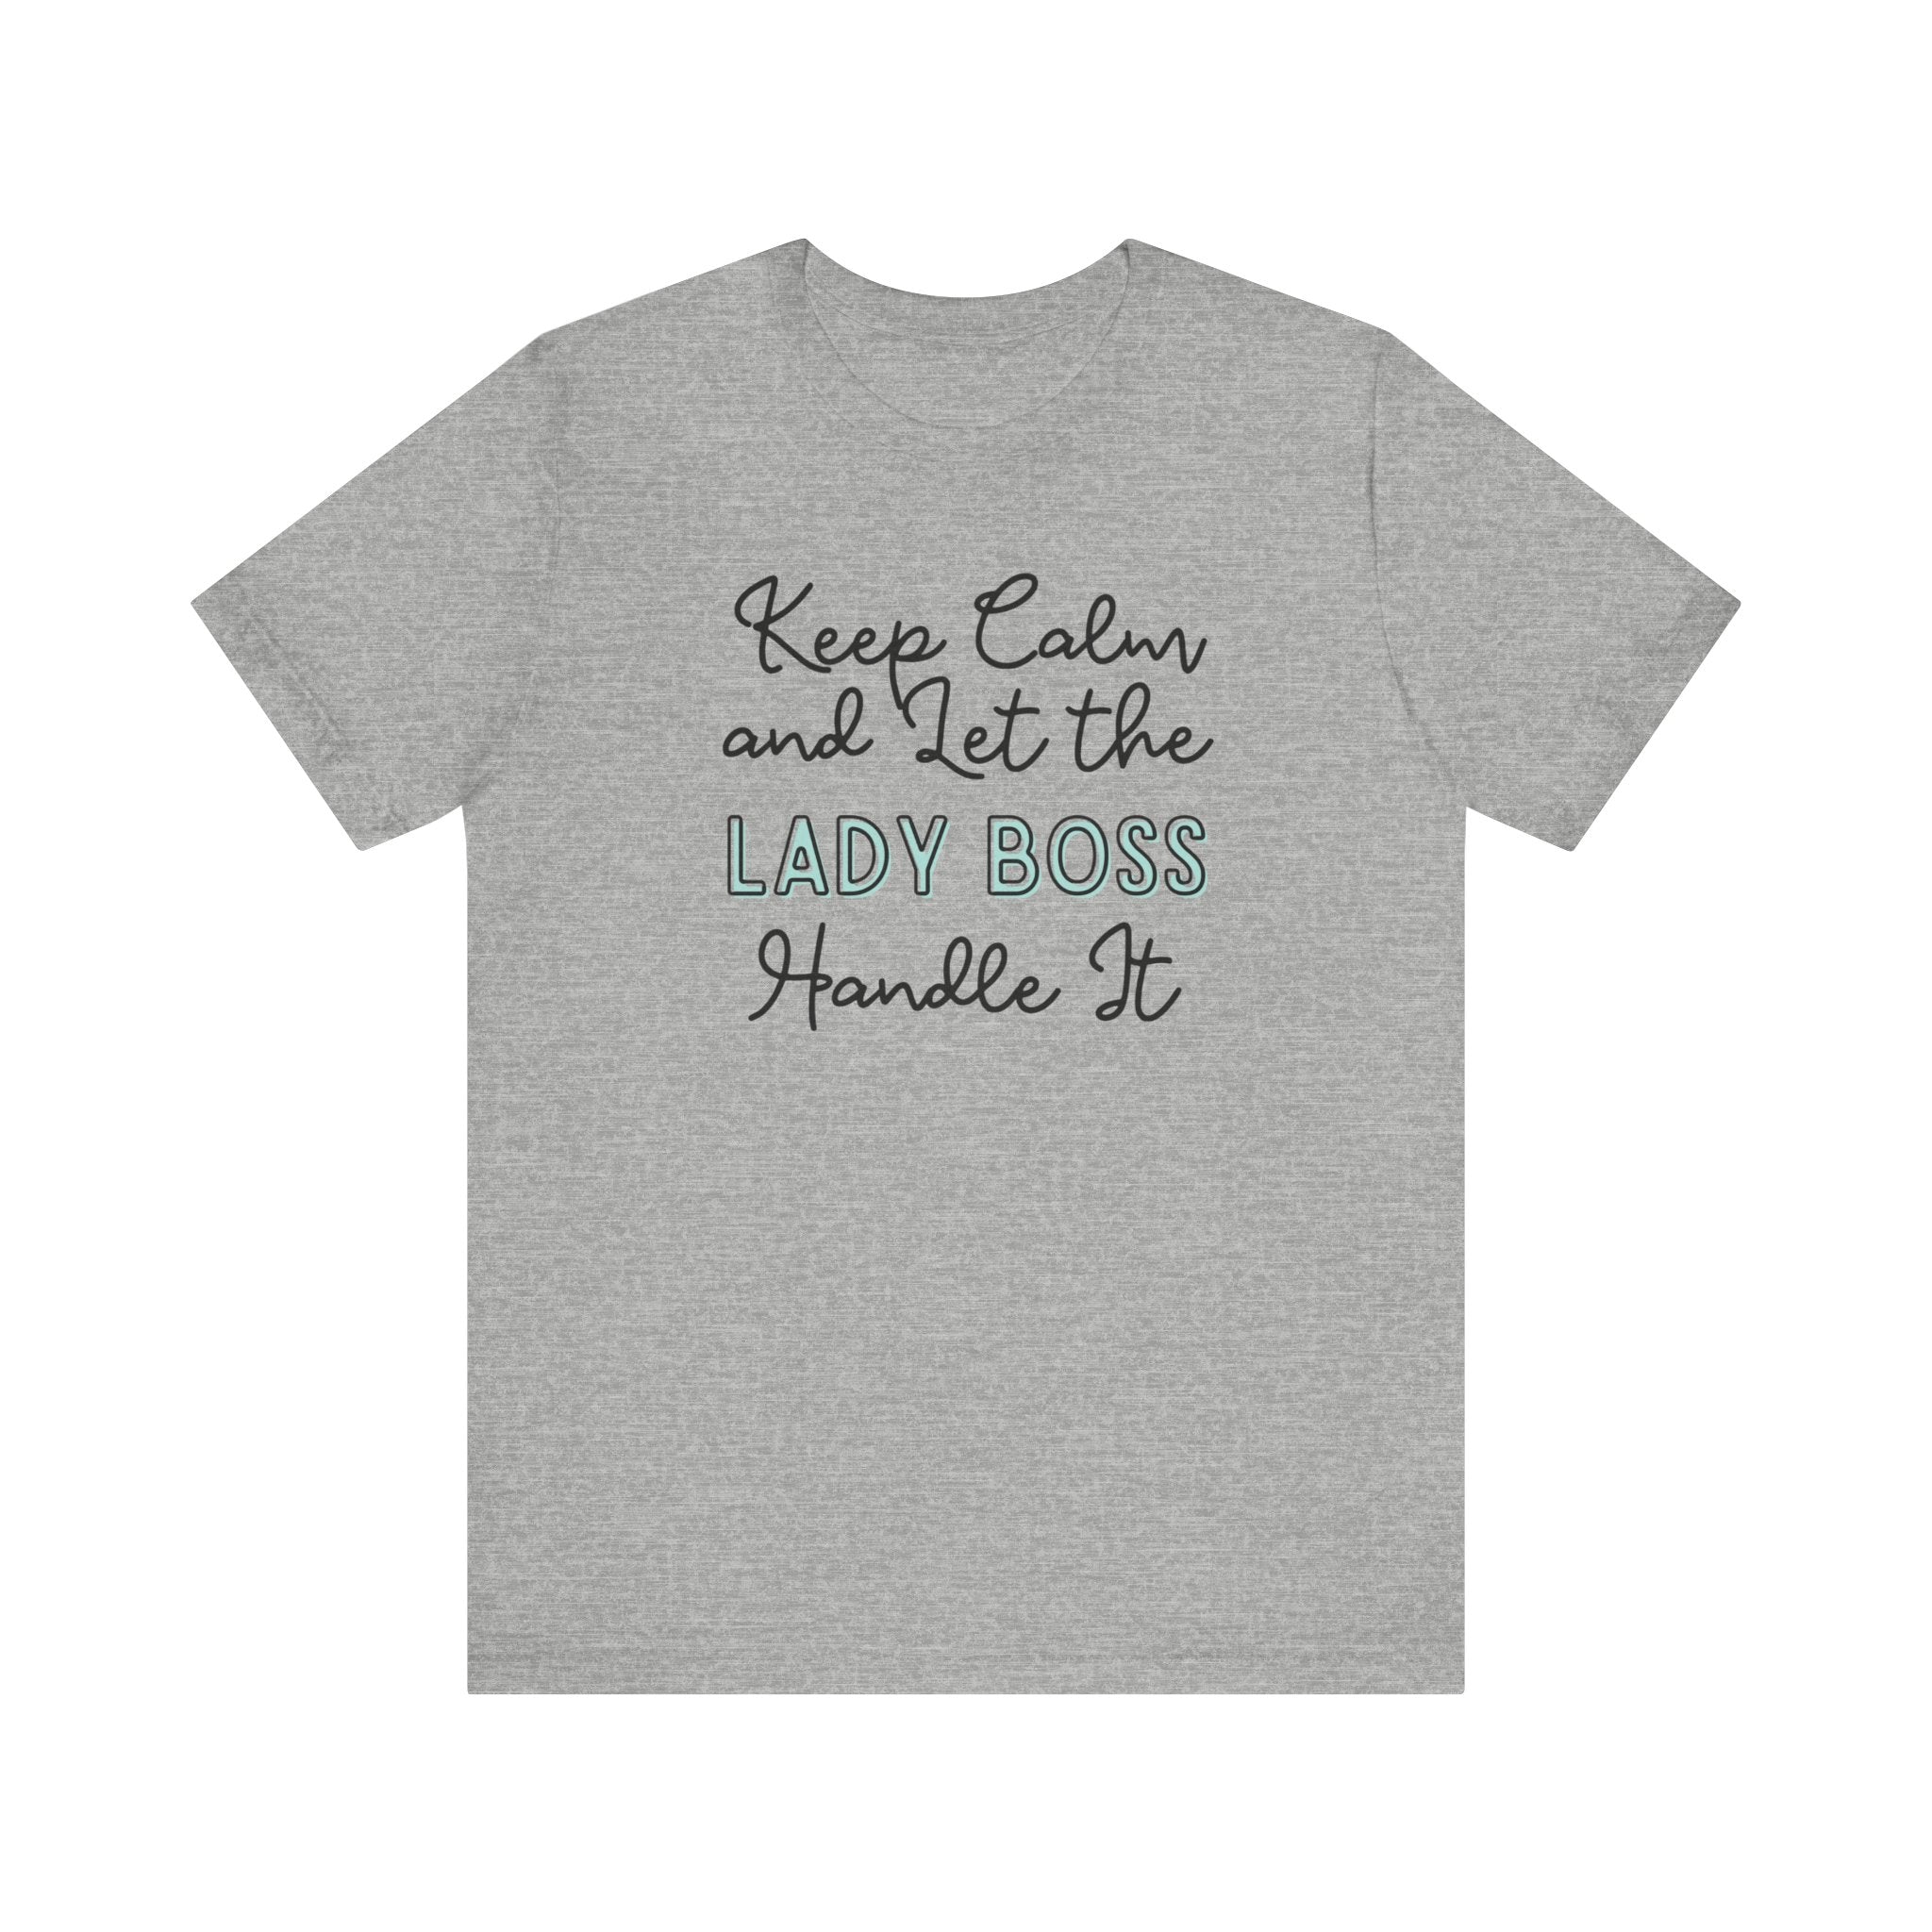 Keep Calm and let the Lady Boss handle It - Jersey Short Sleeve Tee